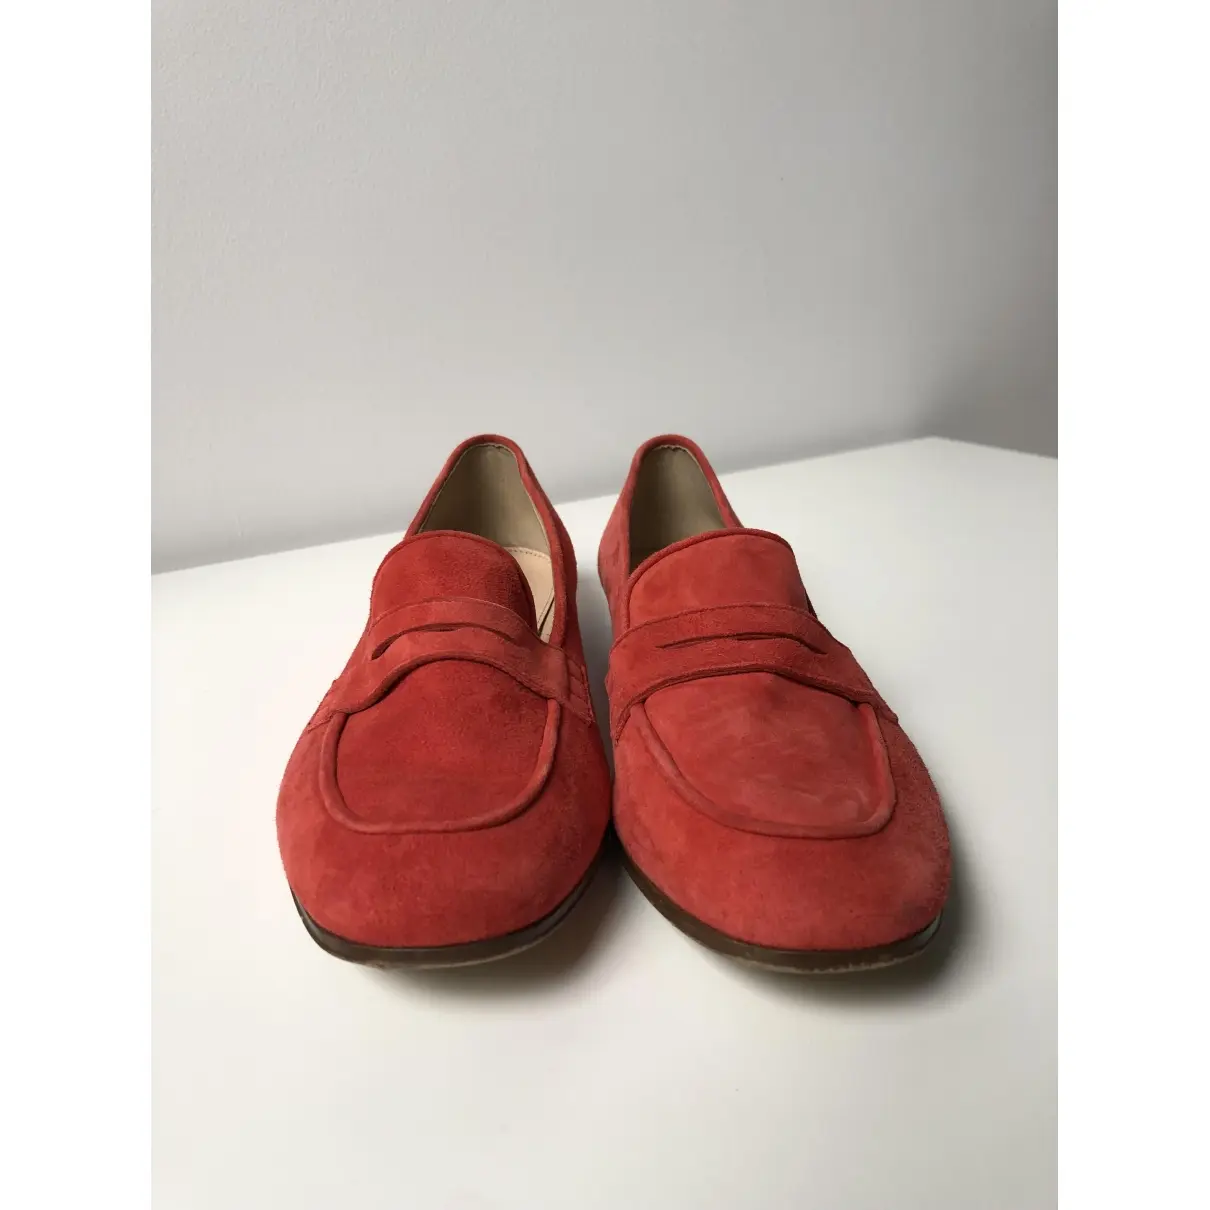 J.Crew Flats for sale